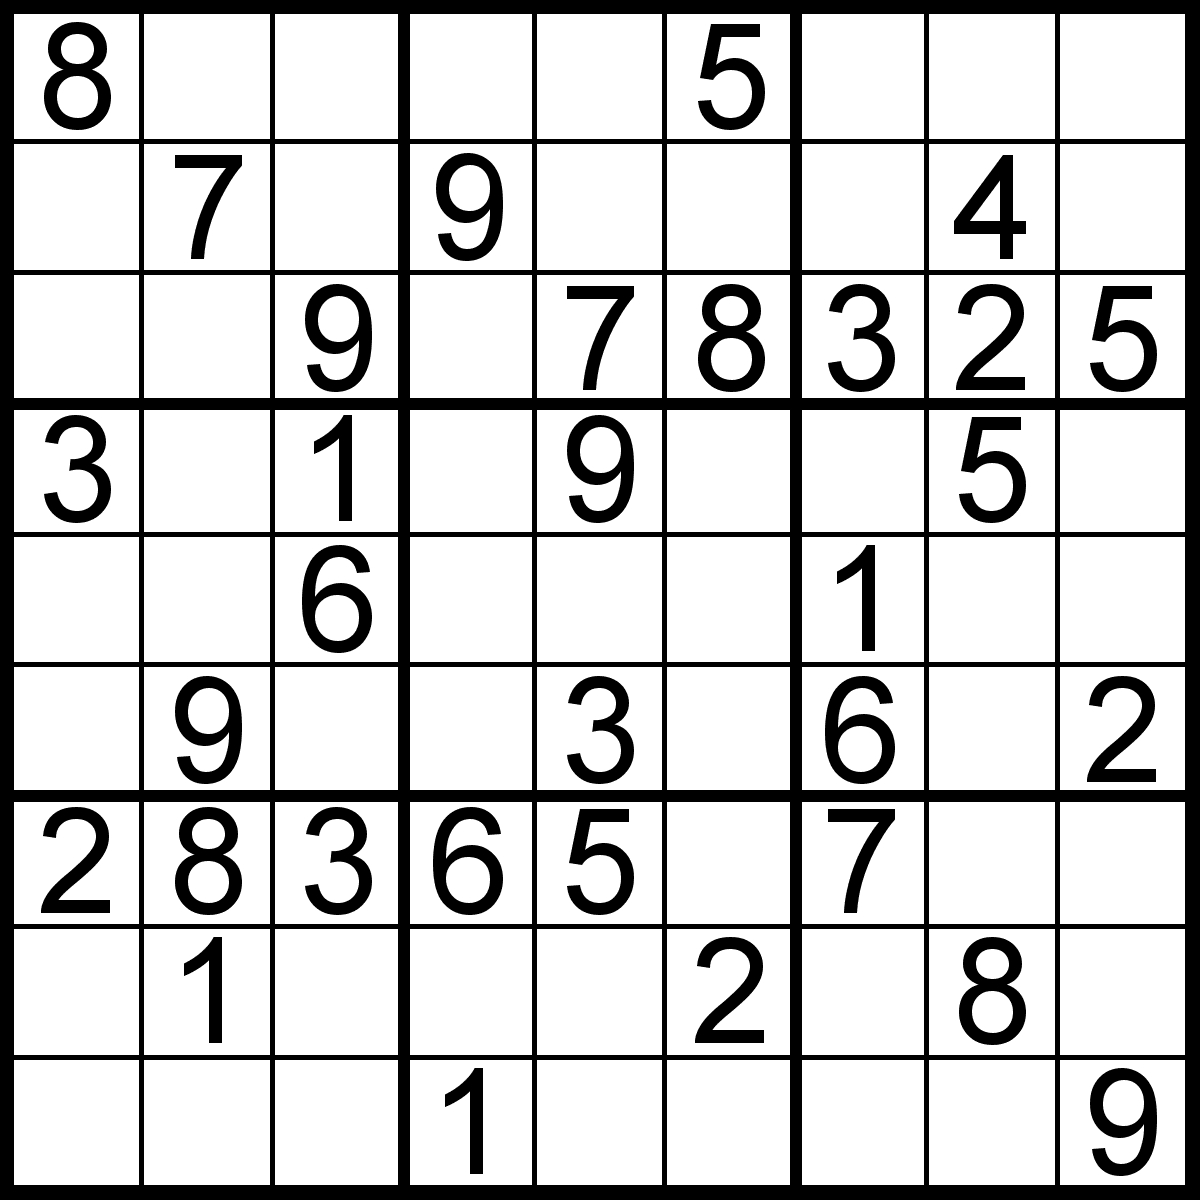 About &amp;#039;printable Sudoku Puzzles&amp;#039;|Printable Sudoku Puzzle #77 ~ Tory - Printable Sudoku Puzzles 99